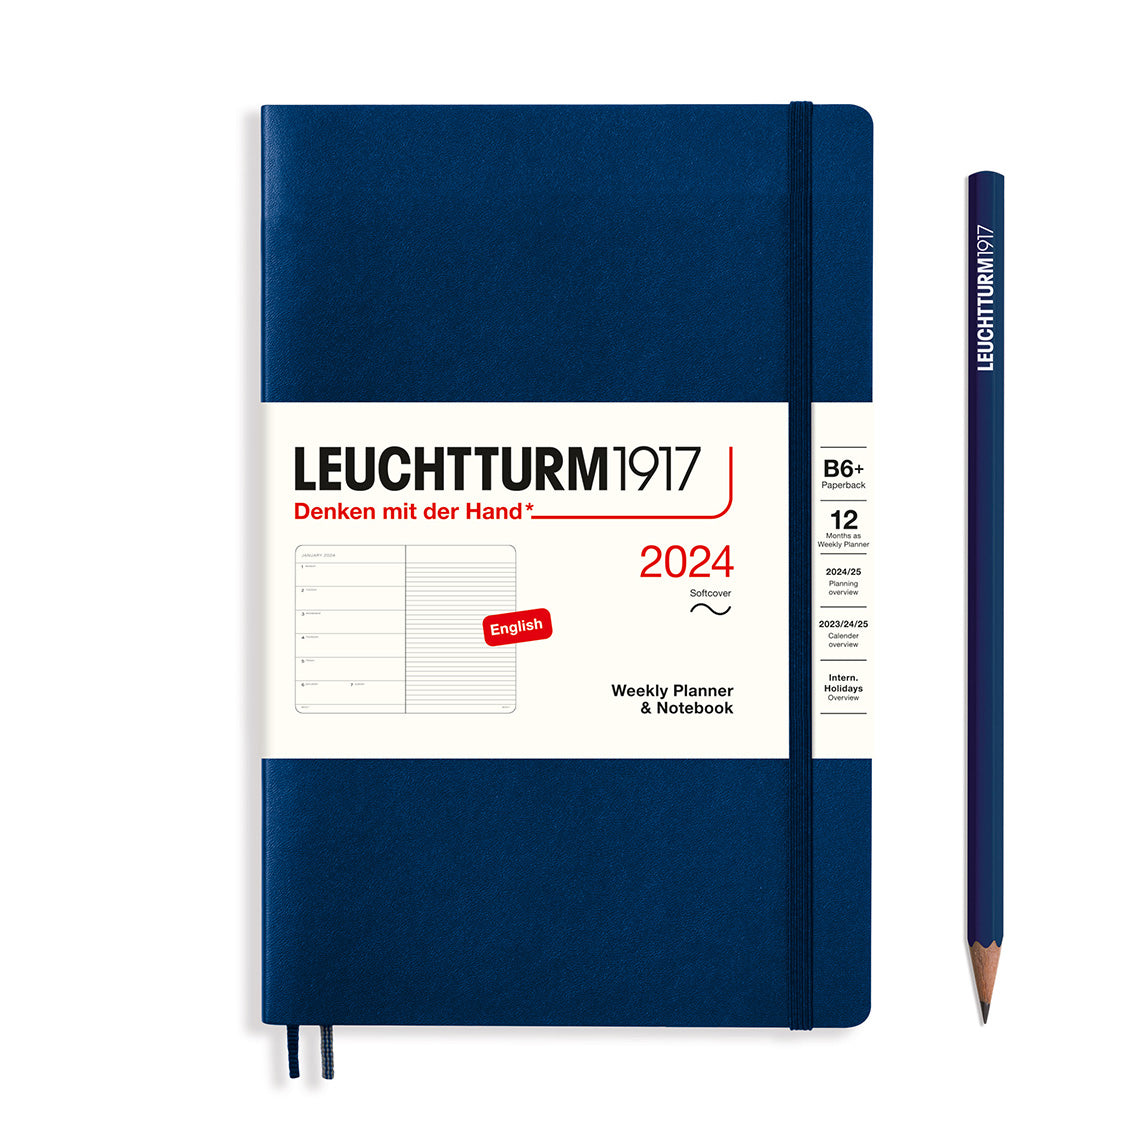 An image of a navy planner with a navy elastic band holding it together and a cream paper wrap around the middle stating the business name Leuchtturm1917, that it is for the year 2024, it is a weekly planner and notebook, is B6+ in size and an English language version. It has an image on the wrap showing the inside layout which is a week on the left hand page and a notes page on thr right hand page. A navy pencil is shown at the side of the planner.